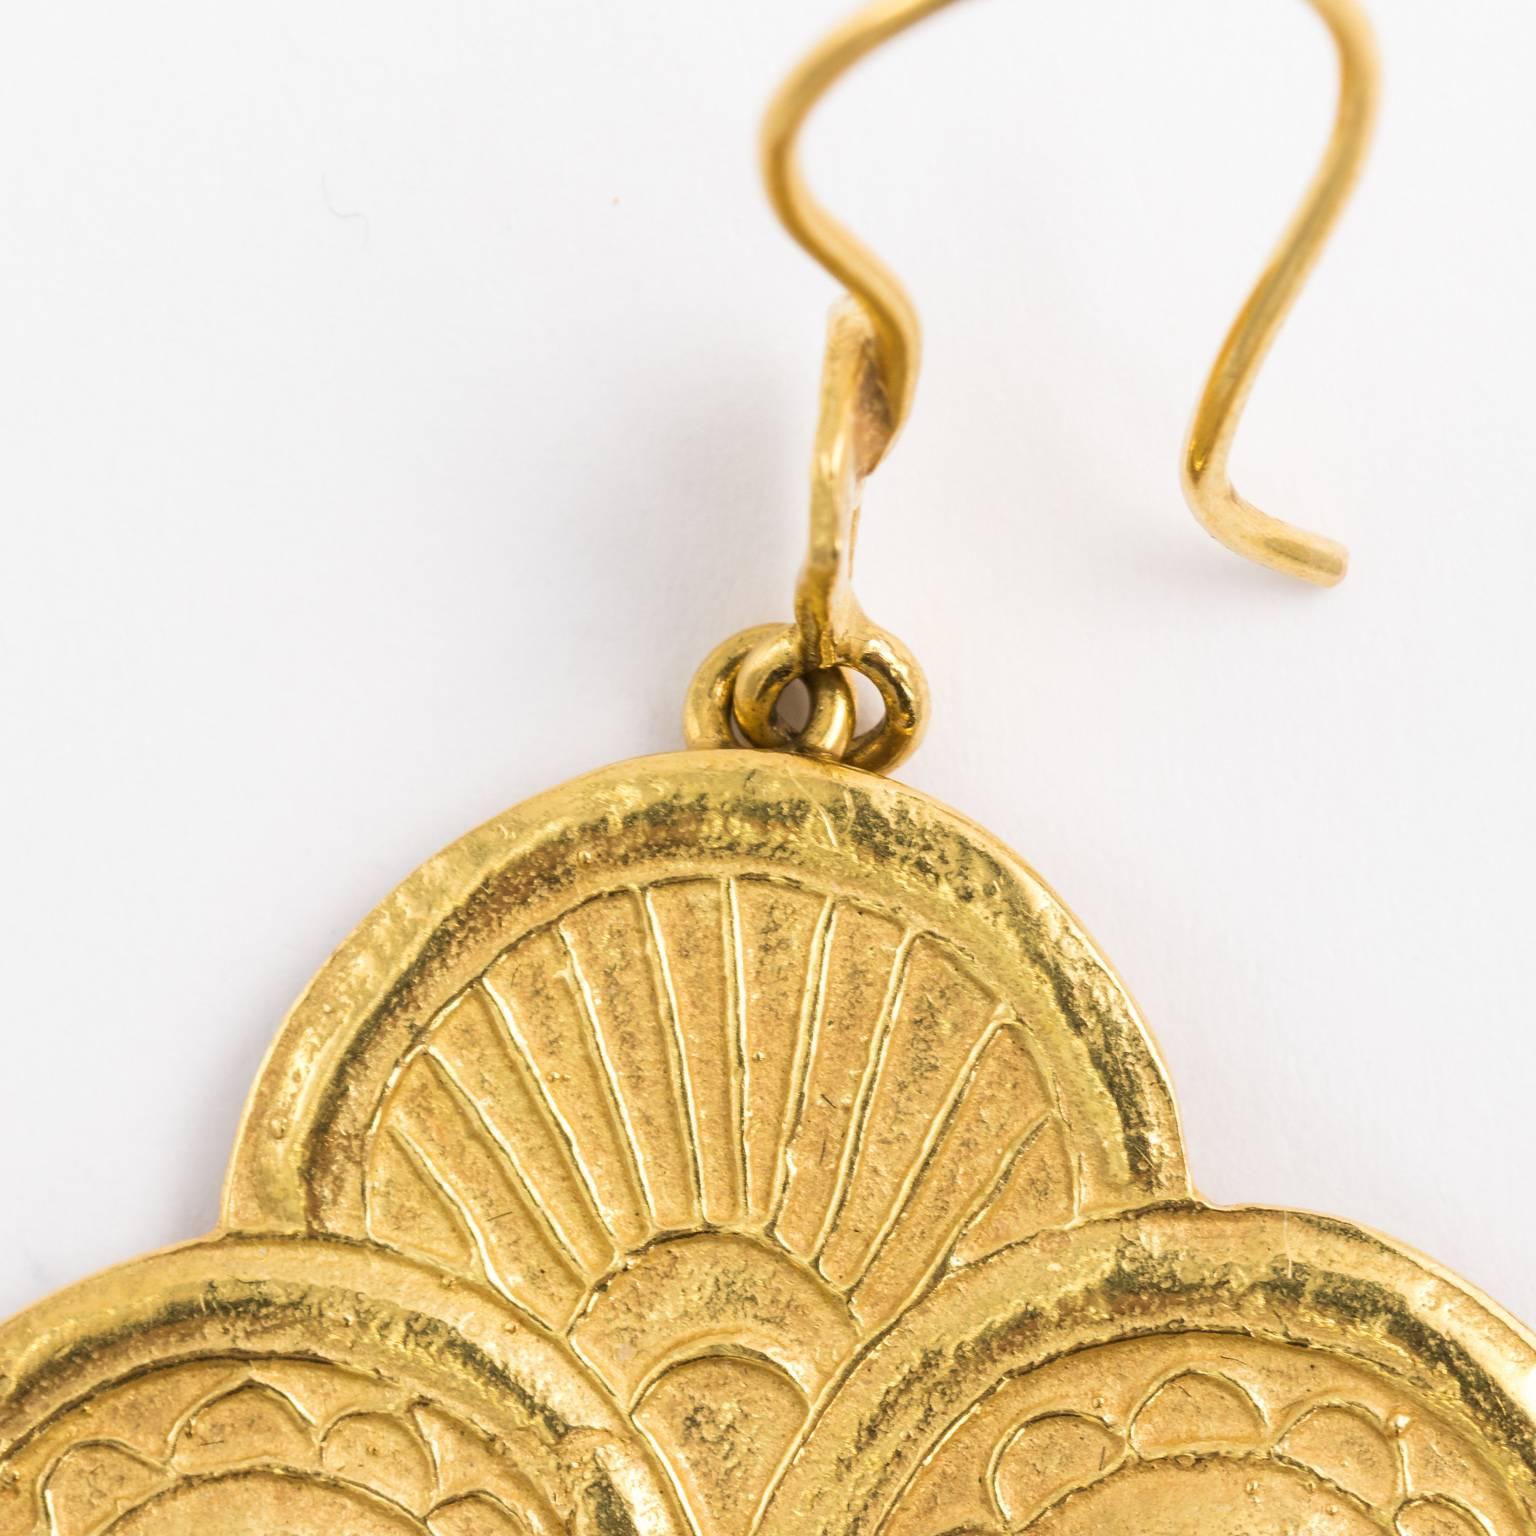 Circa mid 20th century Byzantine style earrings in 18 karat gold that features an intersecting circle design with three drops.
